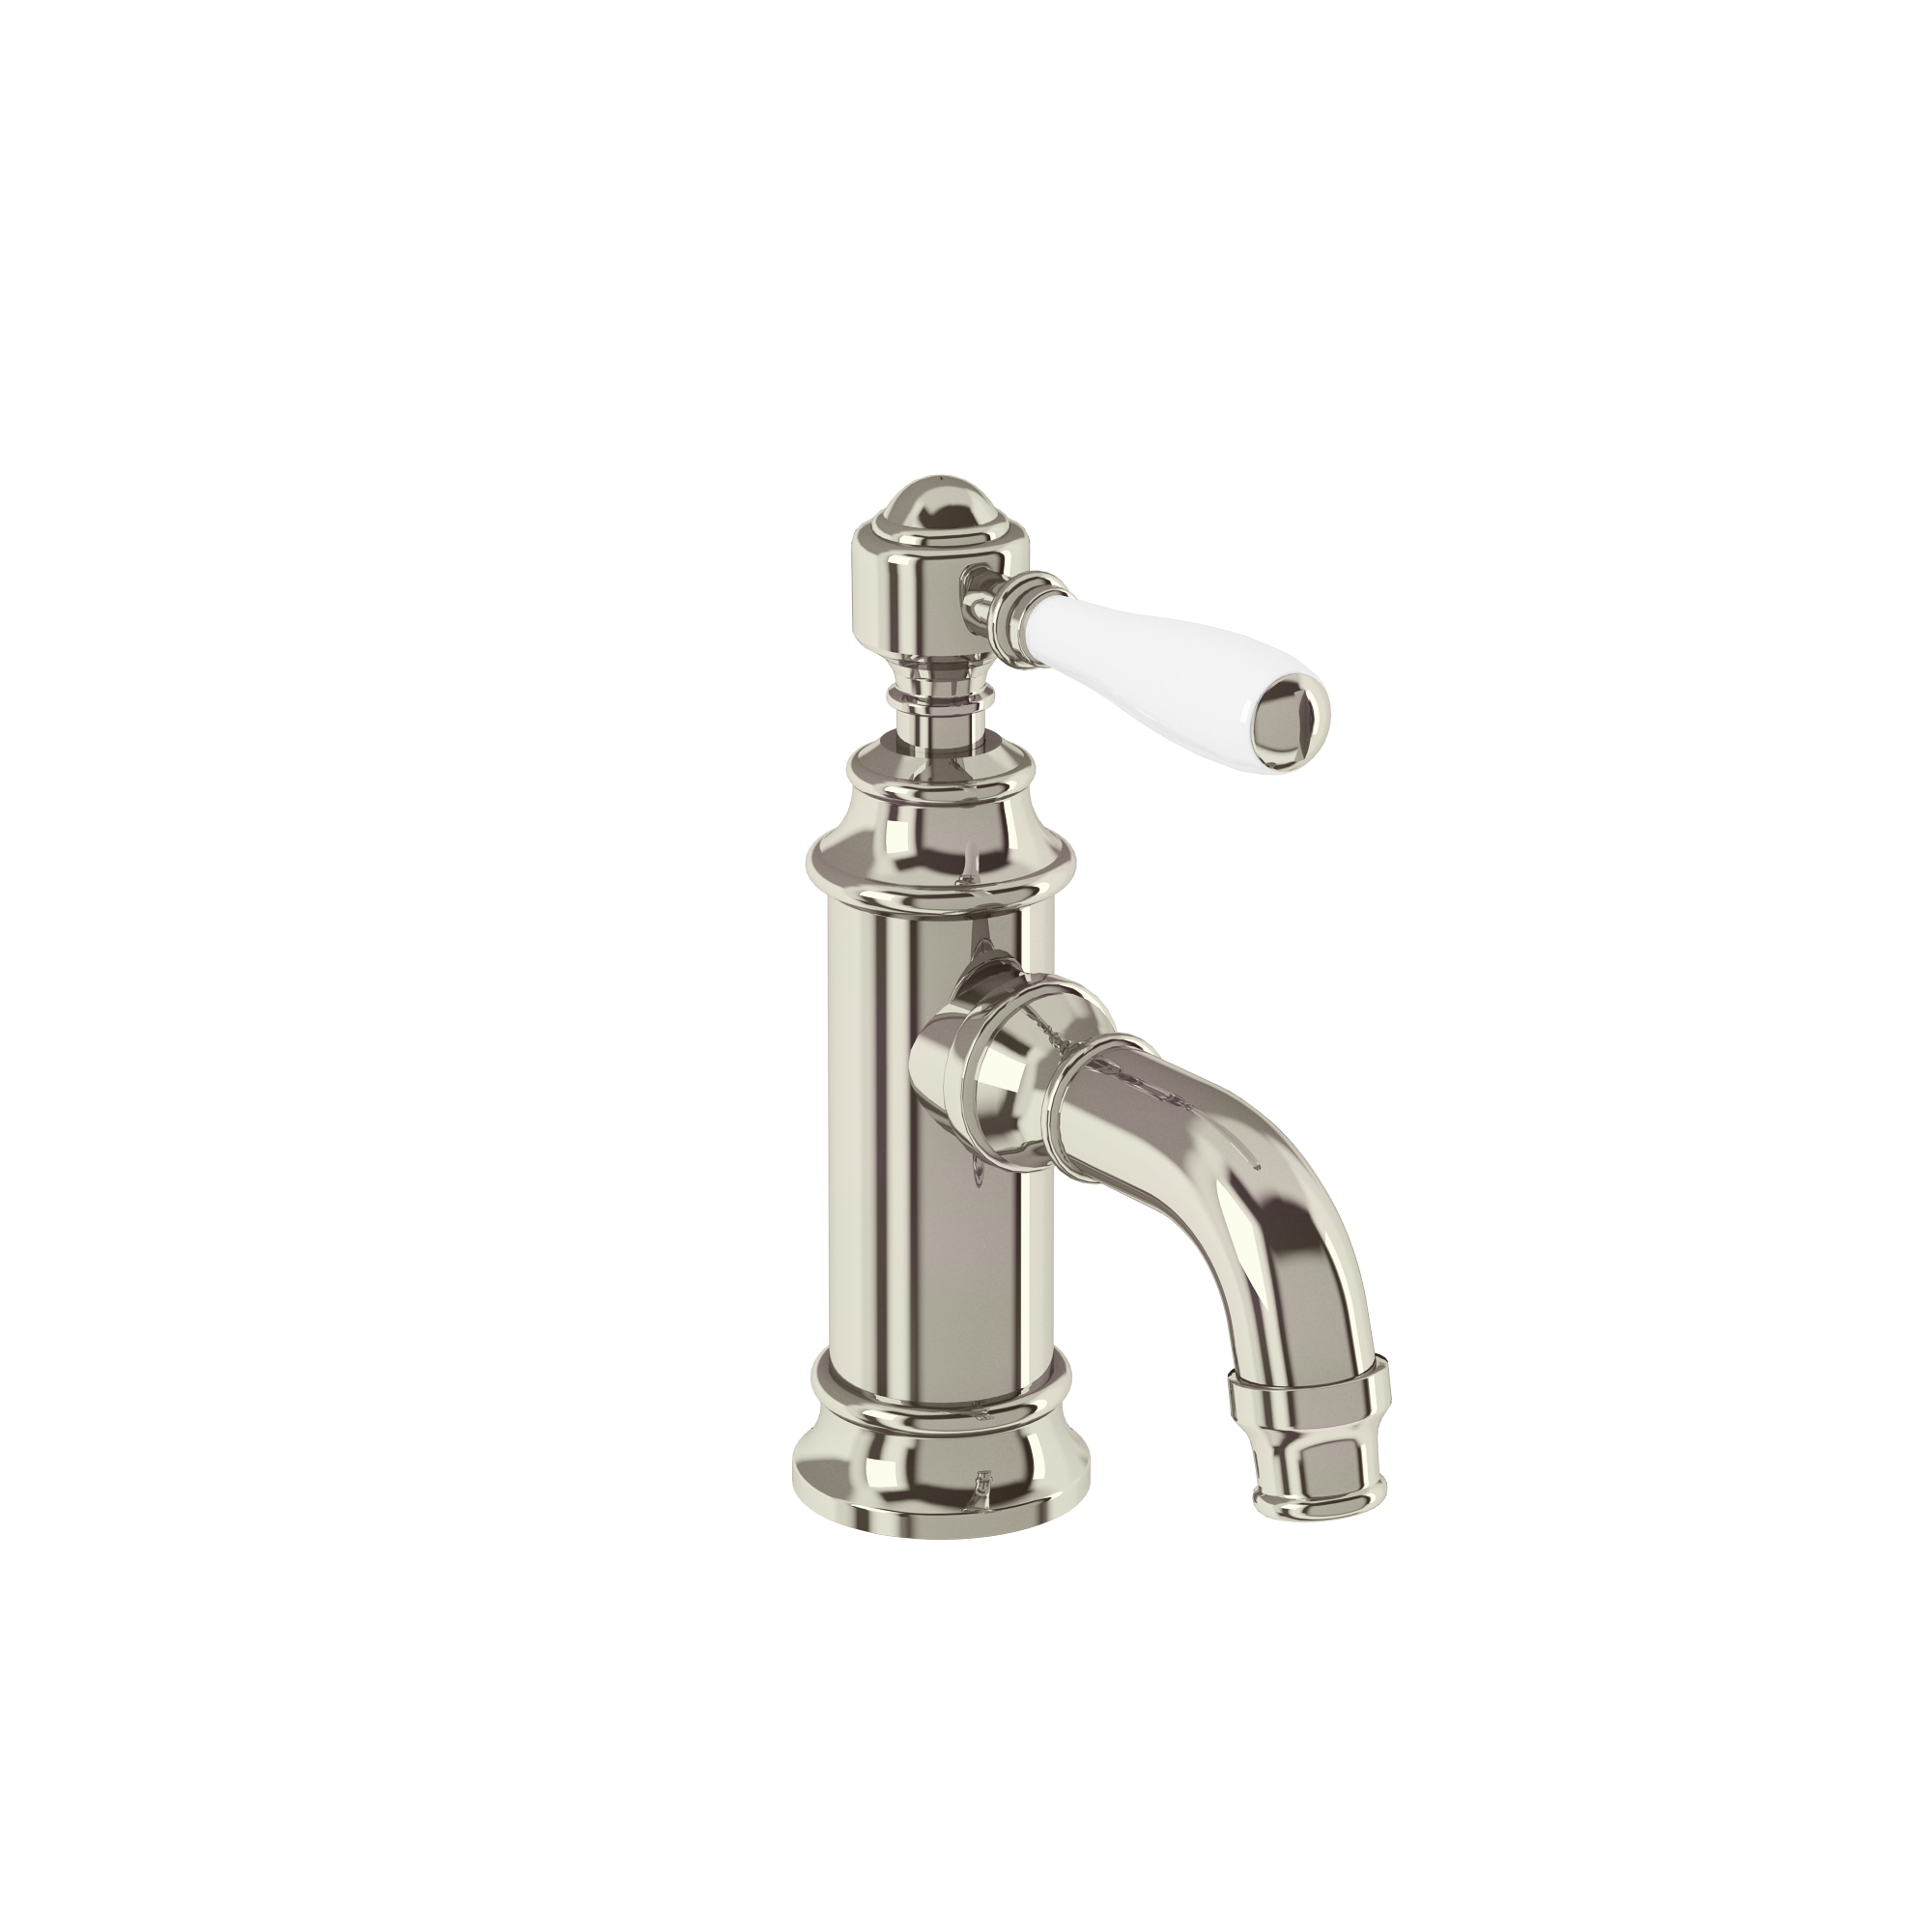 Arcade Mini single-lever basin mixer without pop up waste - nickel - with ceramic lever